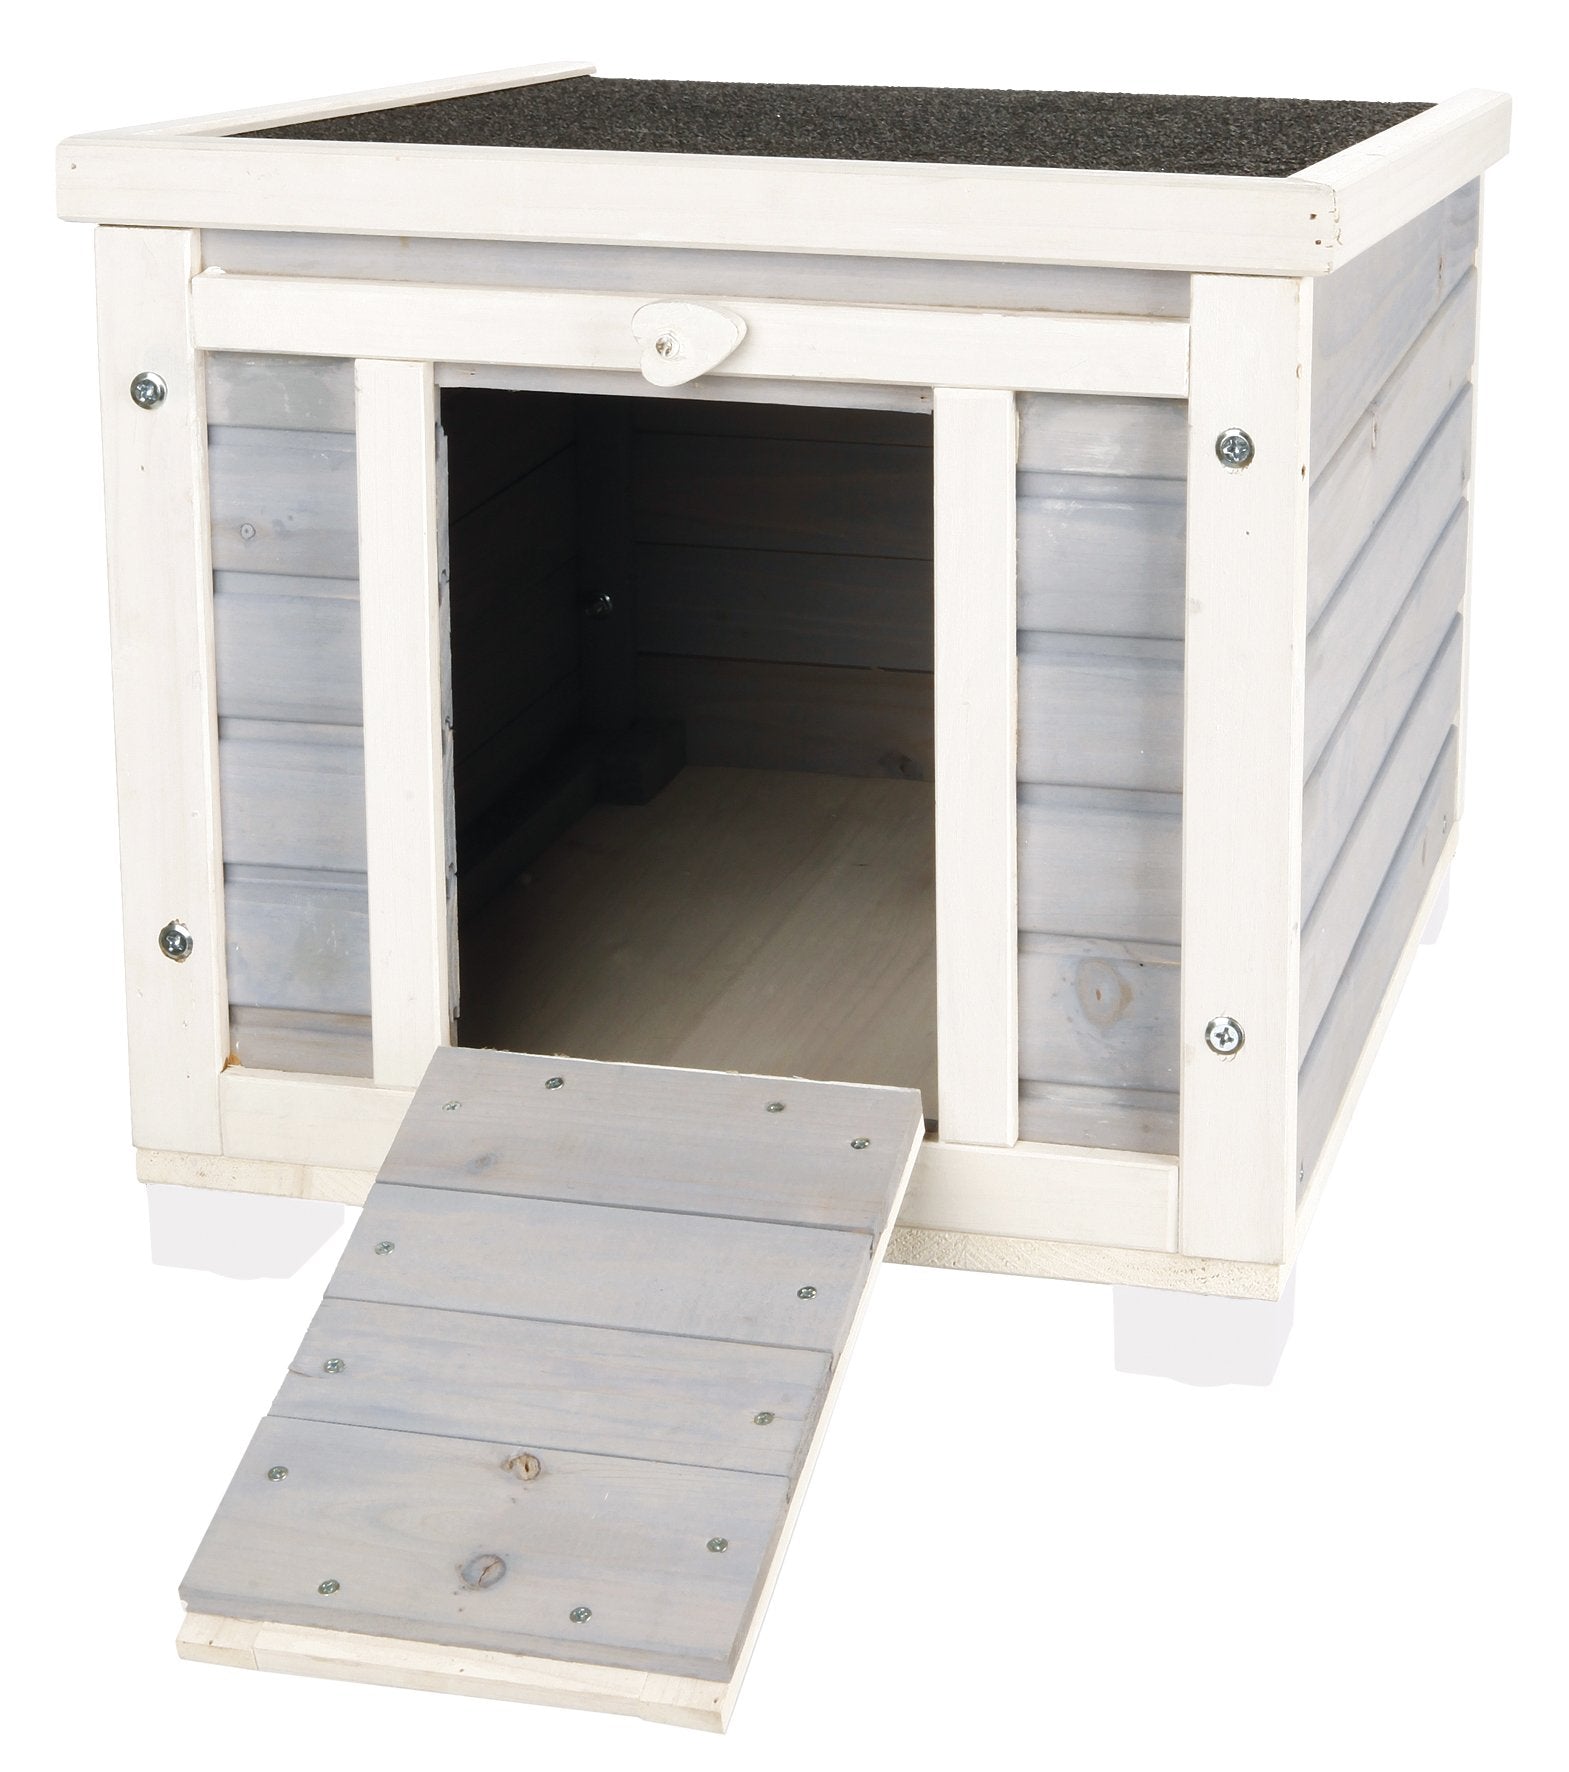 TRIXIE natura Weatherproof Small Outdoor Pet Home, Cat House, Rabbit House, Shelter for Feral Cats or Small Animals